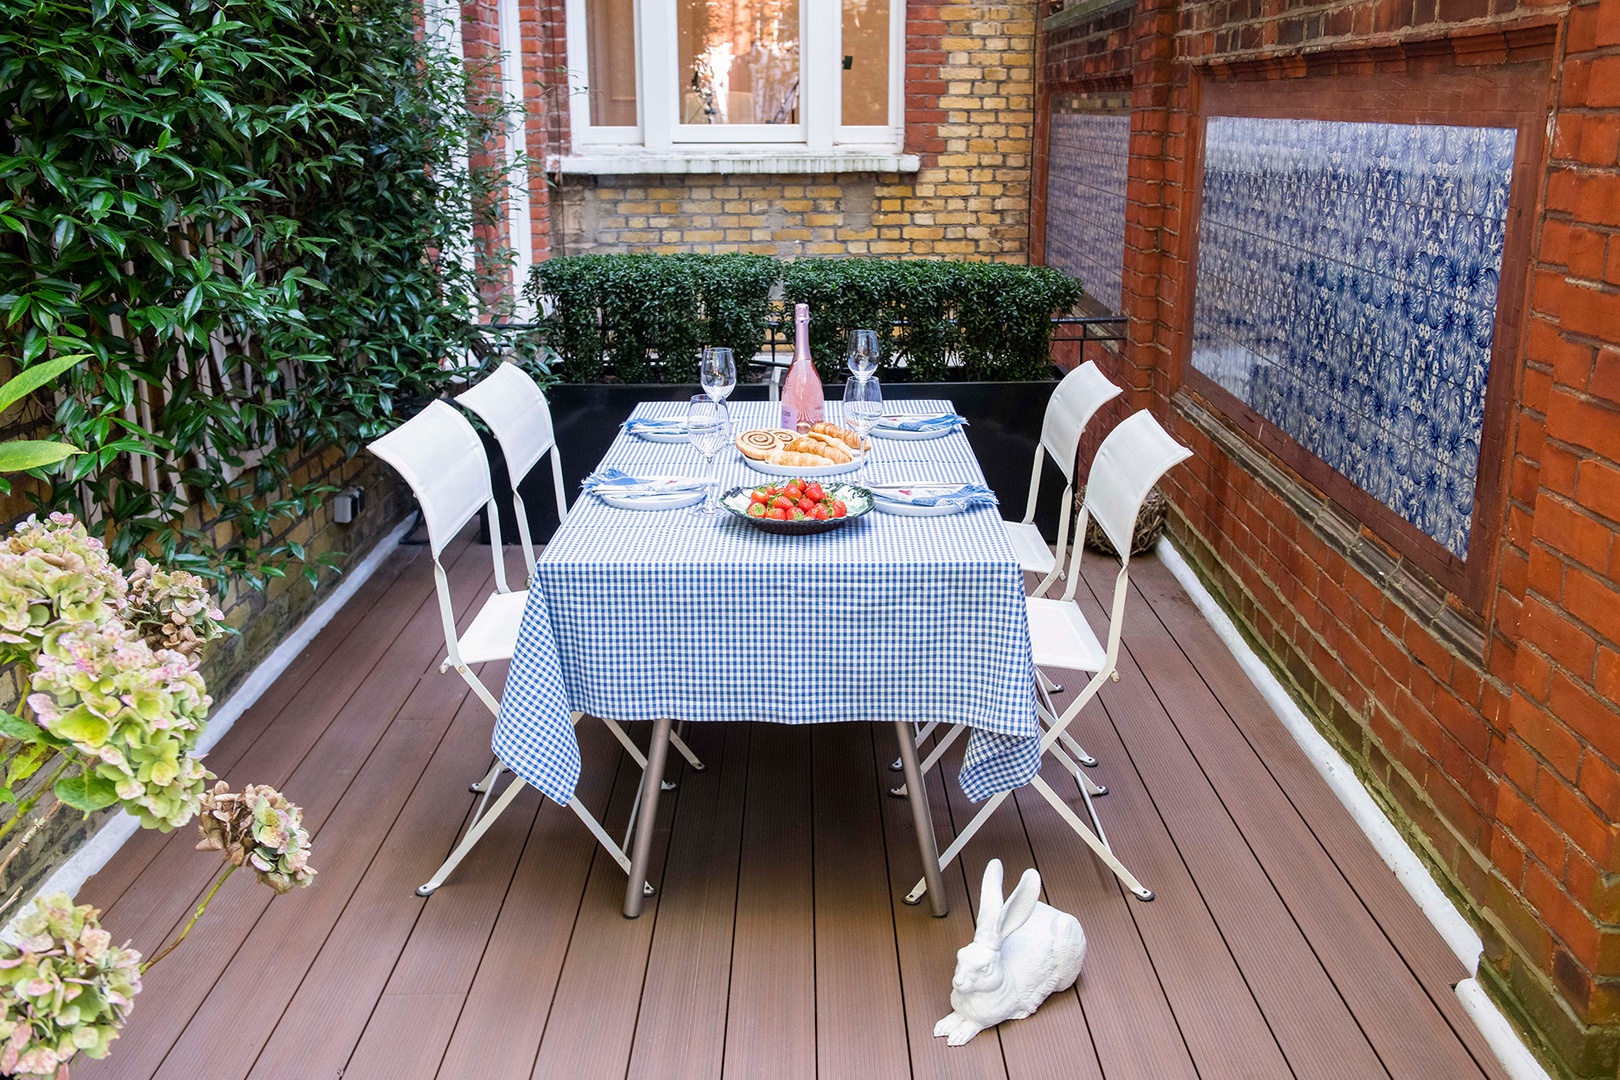 Enjoy dining outdoors on the private terrace - rare in central London!